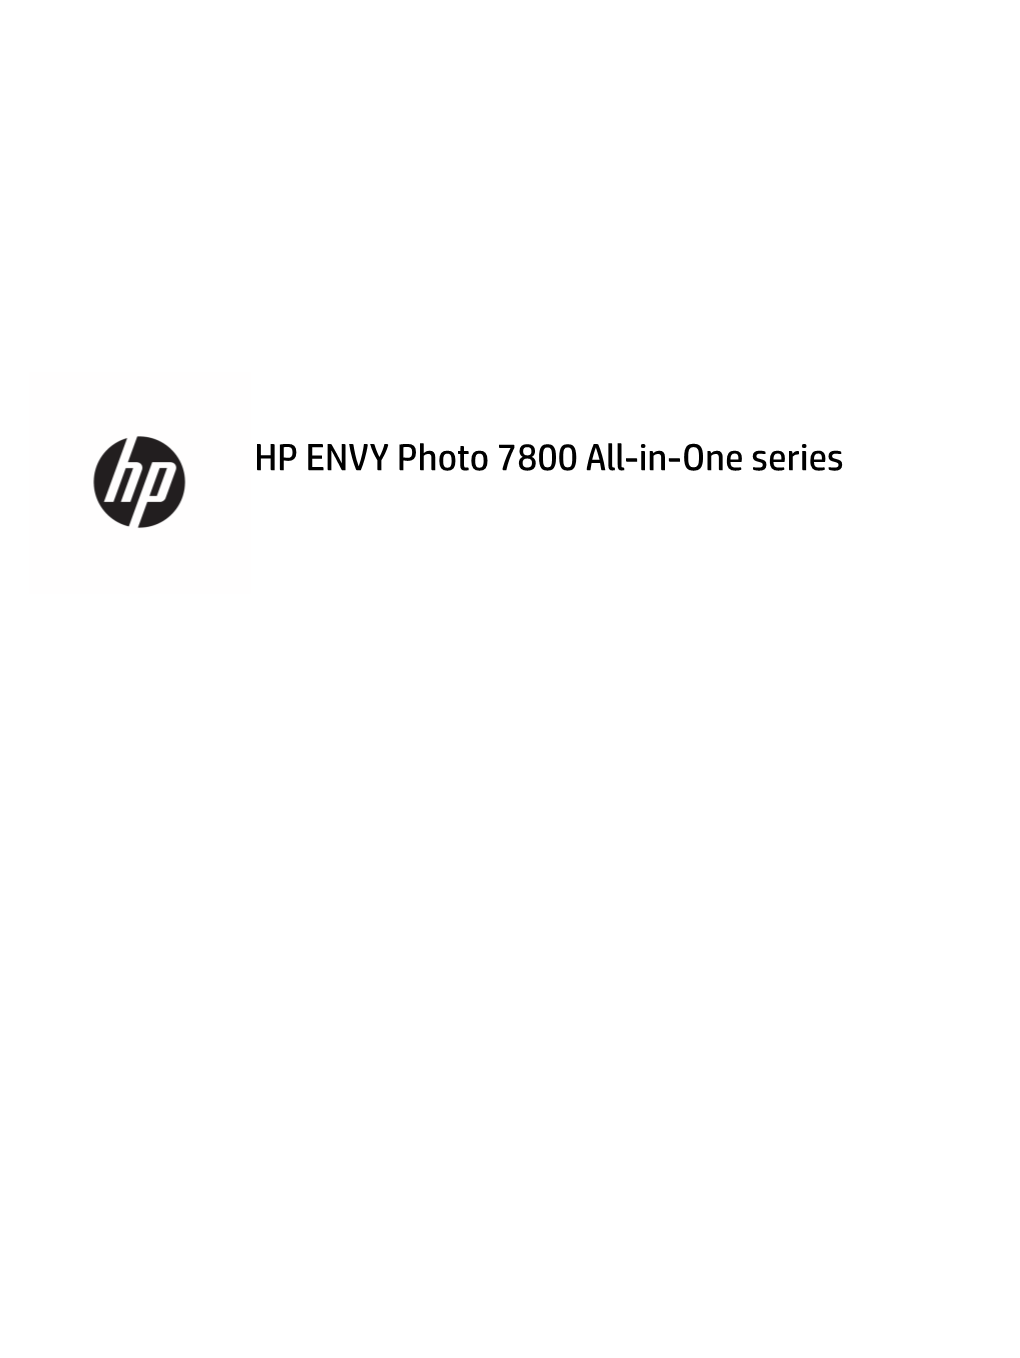 HP ENVY Photo 7800 All-In-One Series – ENWW